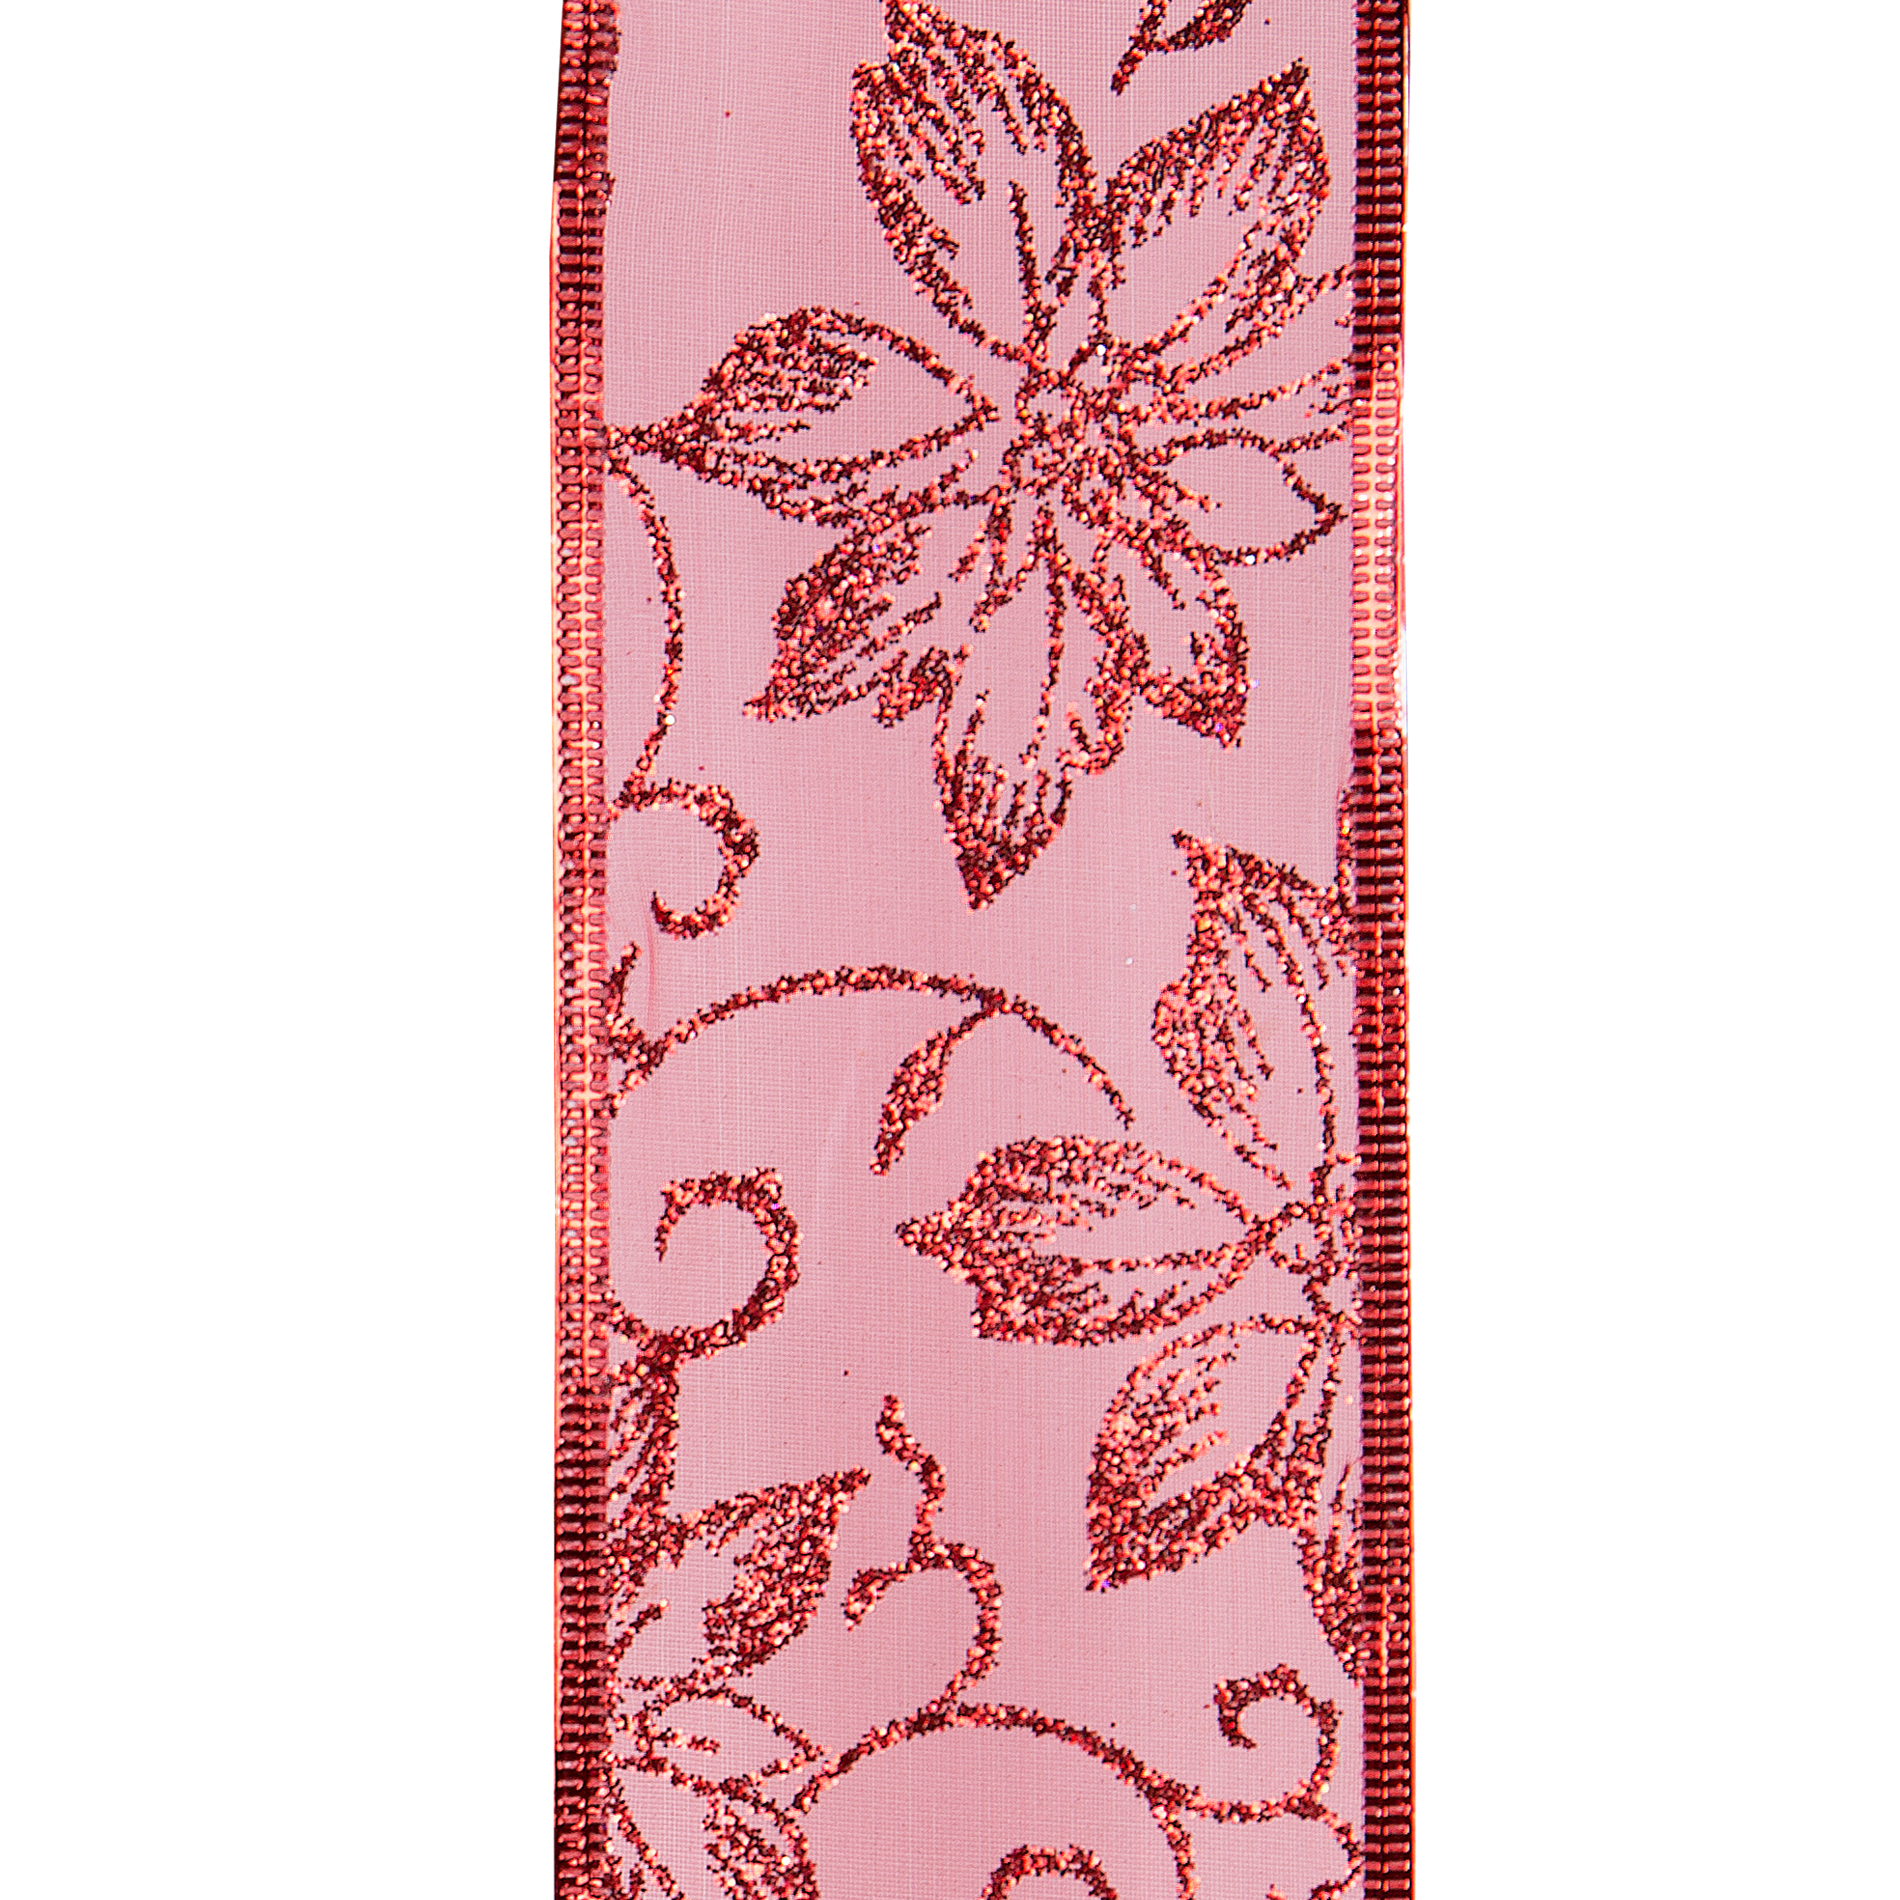 Donner & Blitzen Incorporated 75' Ribbon - Red Sheer With Red Glitter Poinsettia